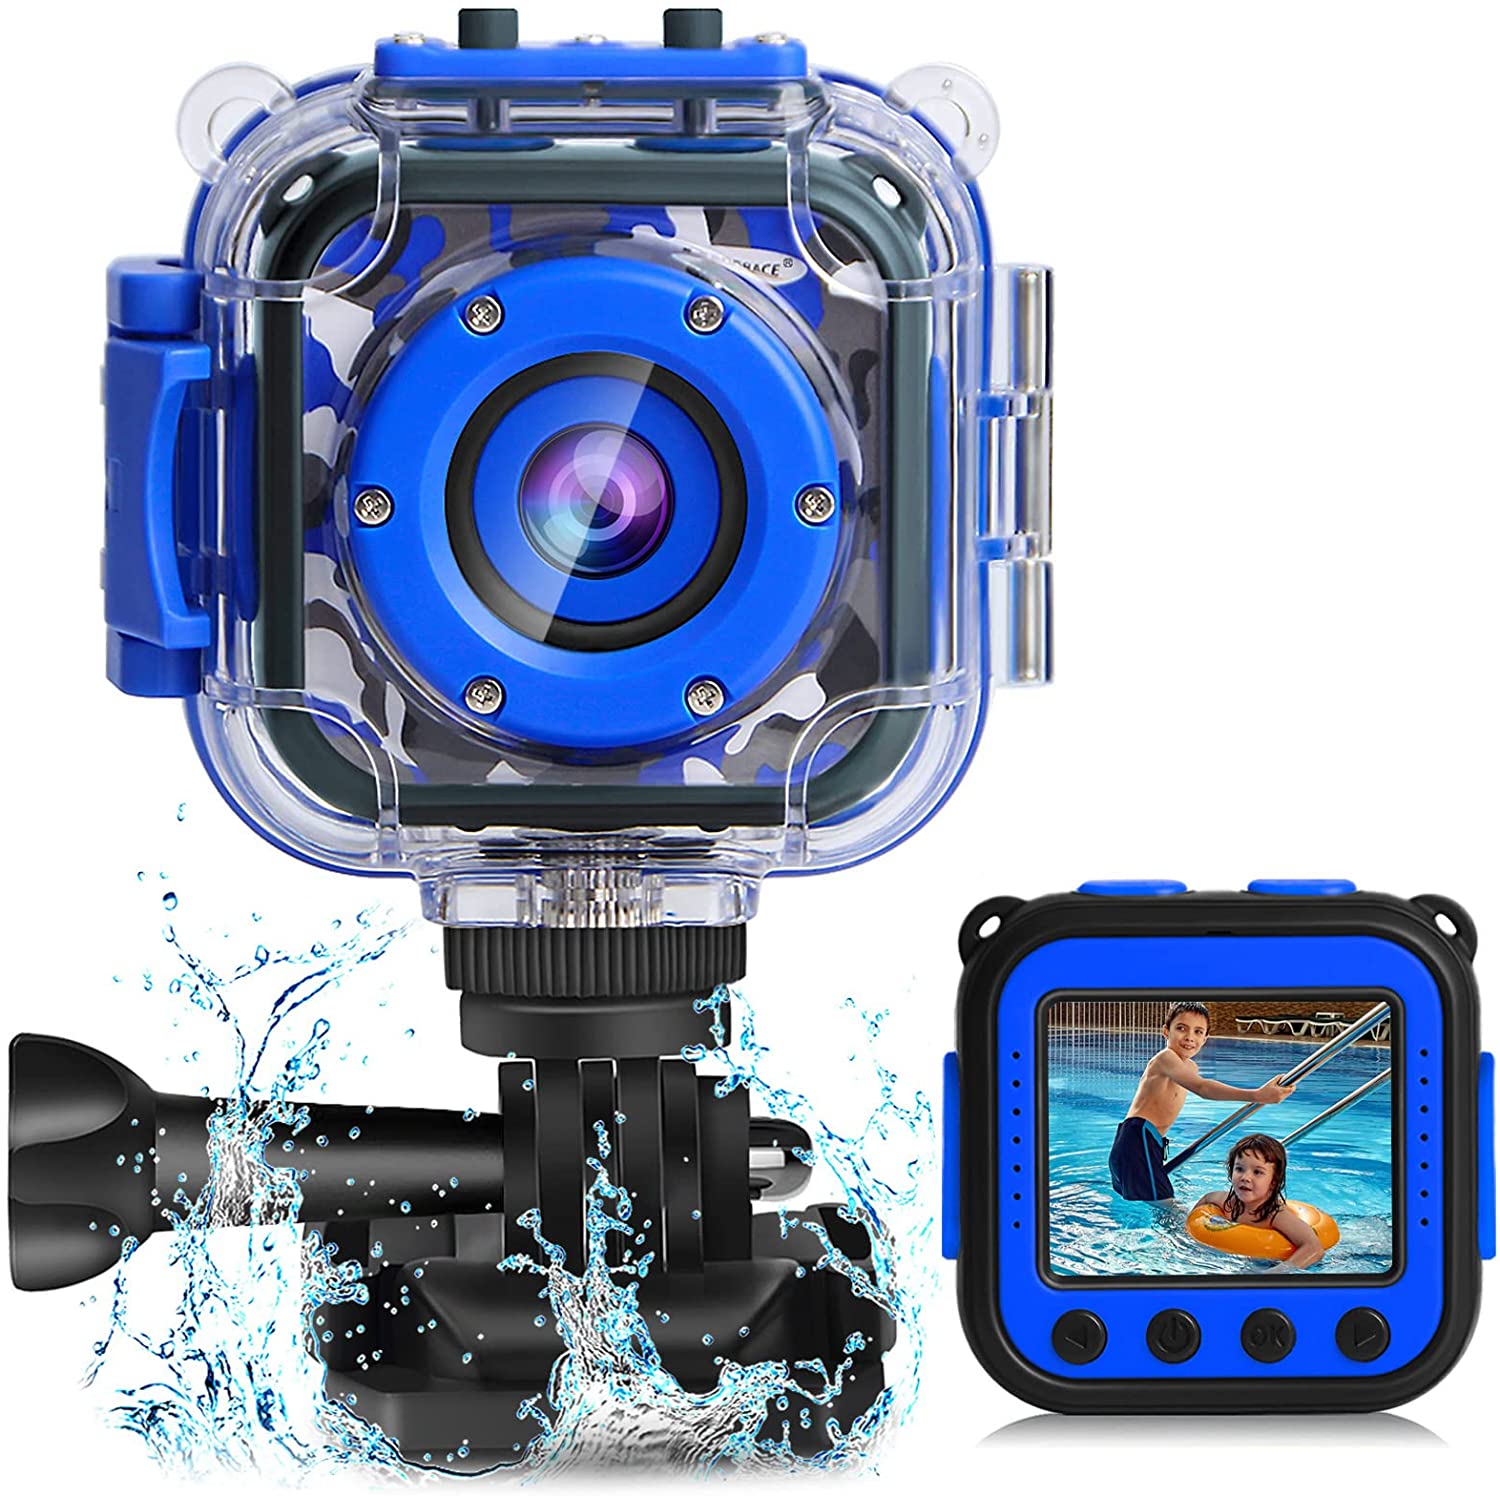 AKAMATE Kids Action Camera Waterproof Video Digital Children Cam 1080P HD Sports Camera Camcorder for Boys Girls Blue Build-in 3 Games 32GB SD Card 